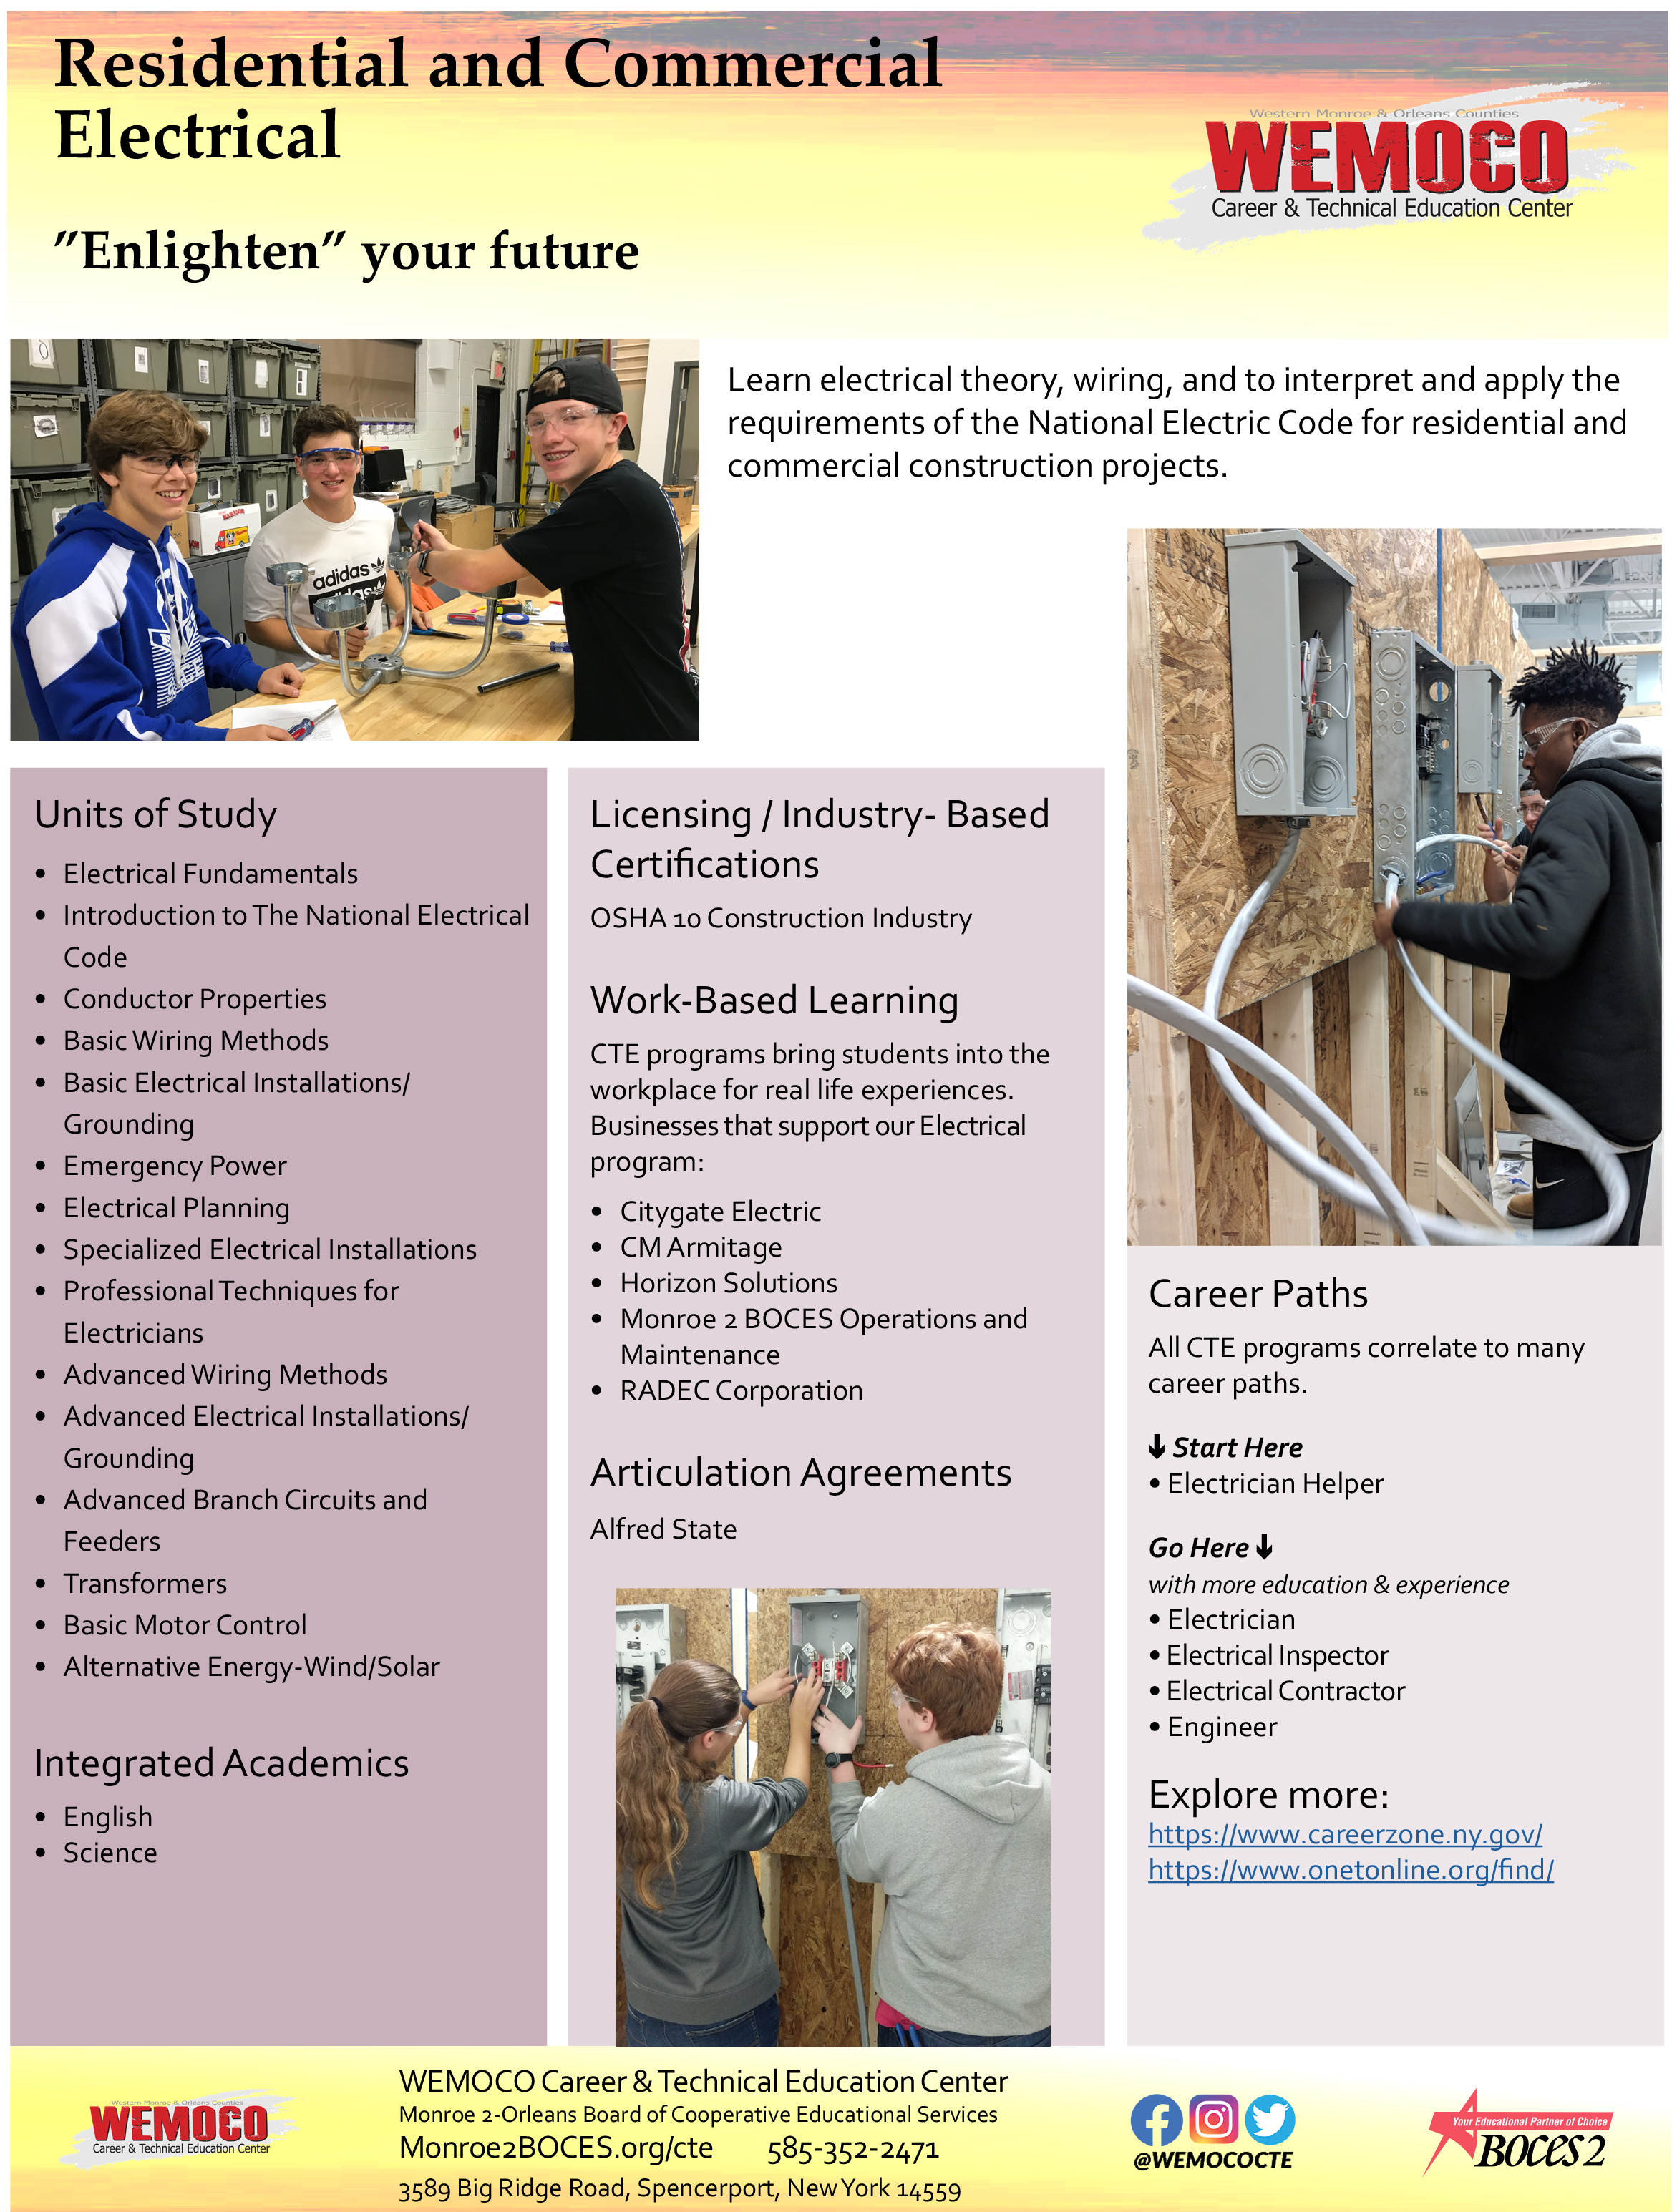 Res and Commercial Electrical Program Information